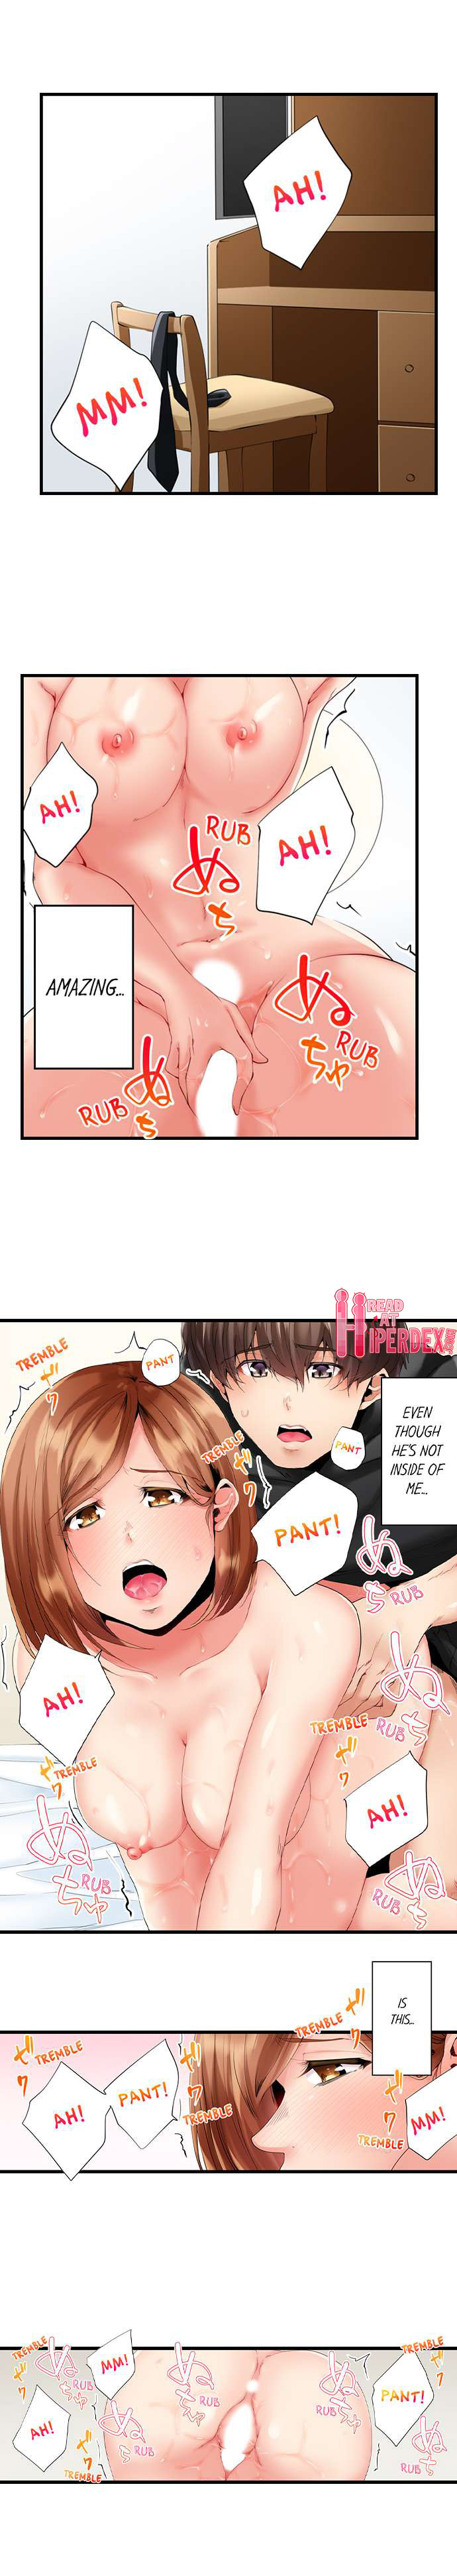 A Rebellious Girl's Sexual Instruction by Her Teacher - Chapter 3 Page 6